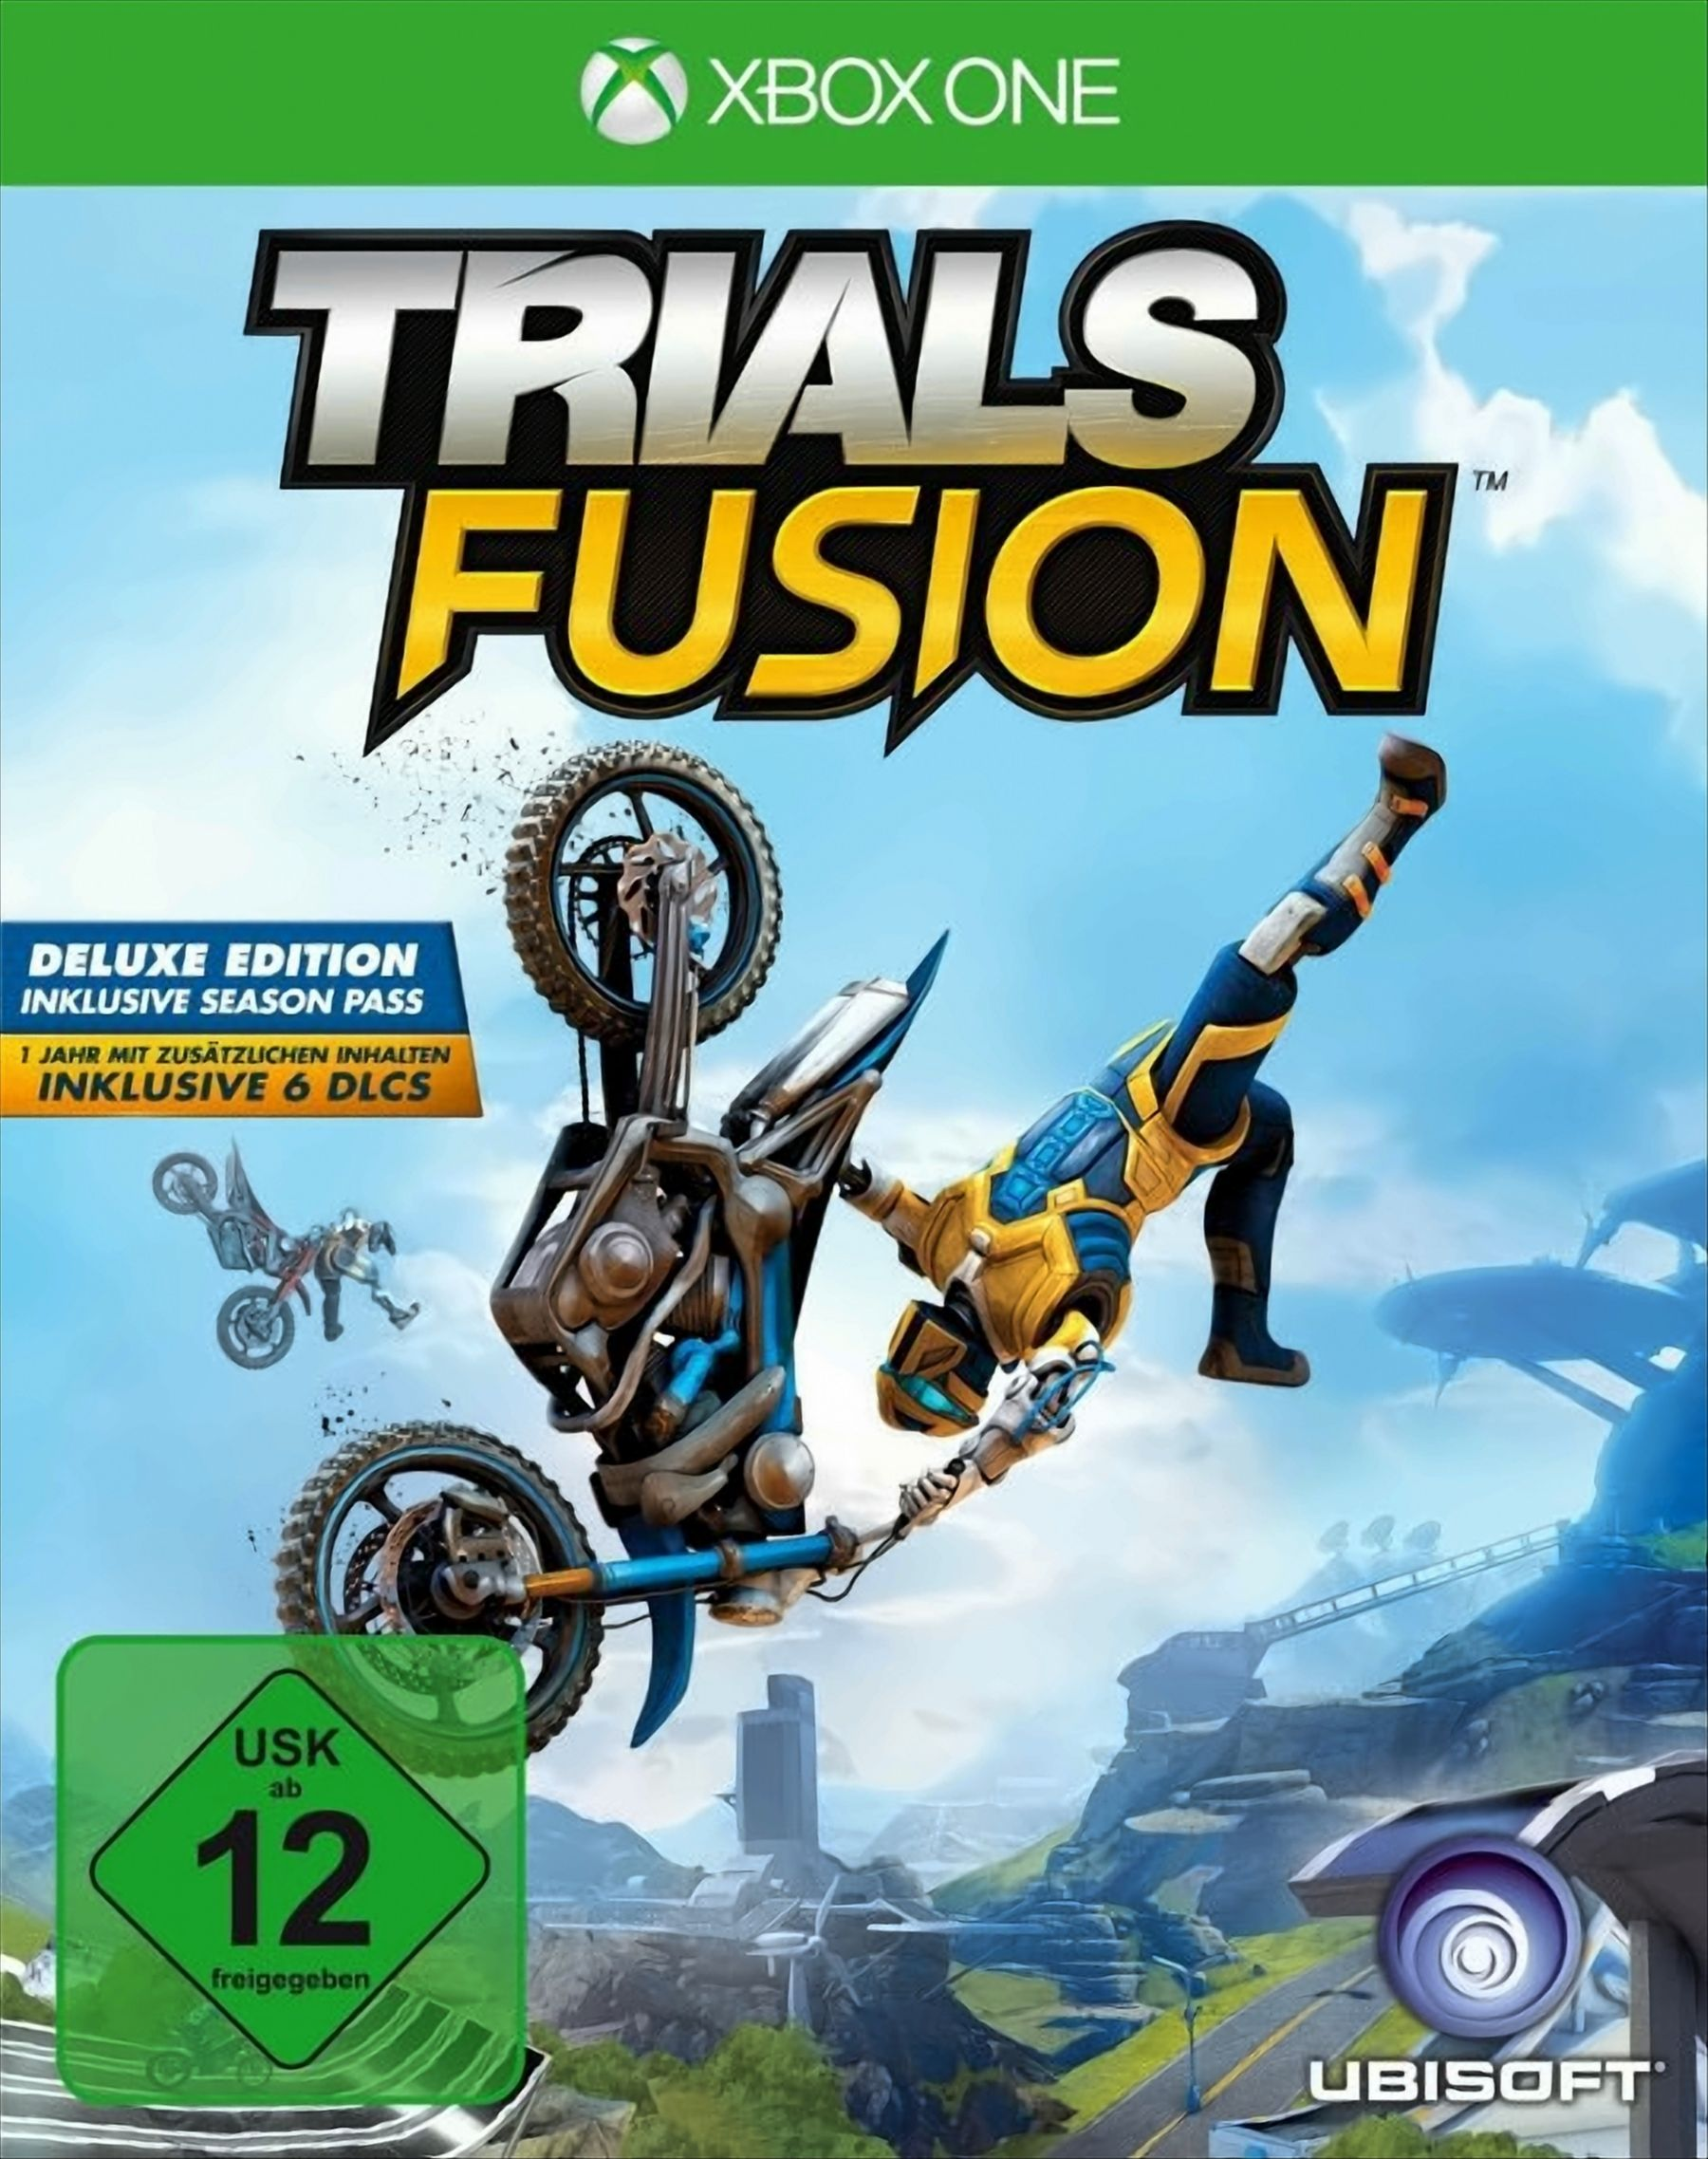 Edition [Xbox Deluxe Fusion Trials - One] -